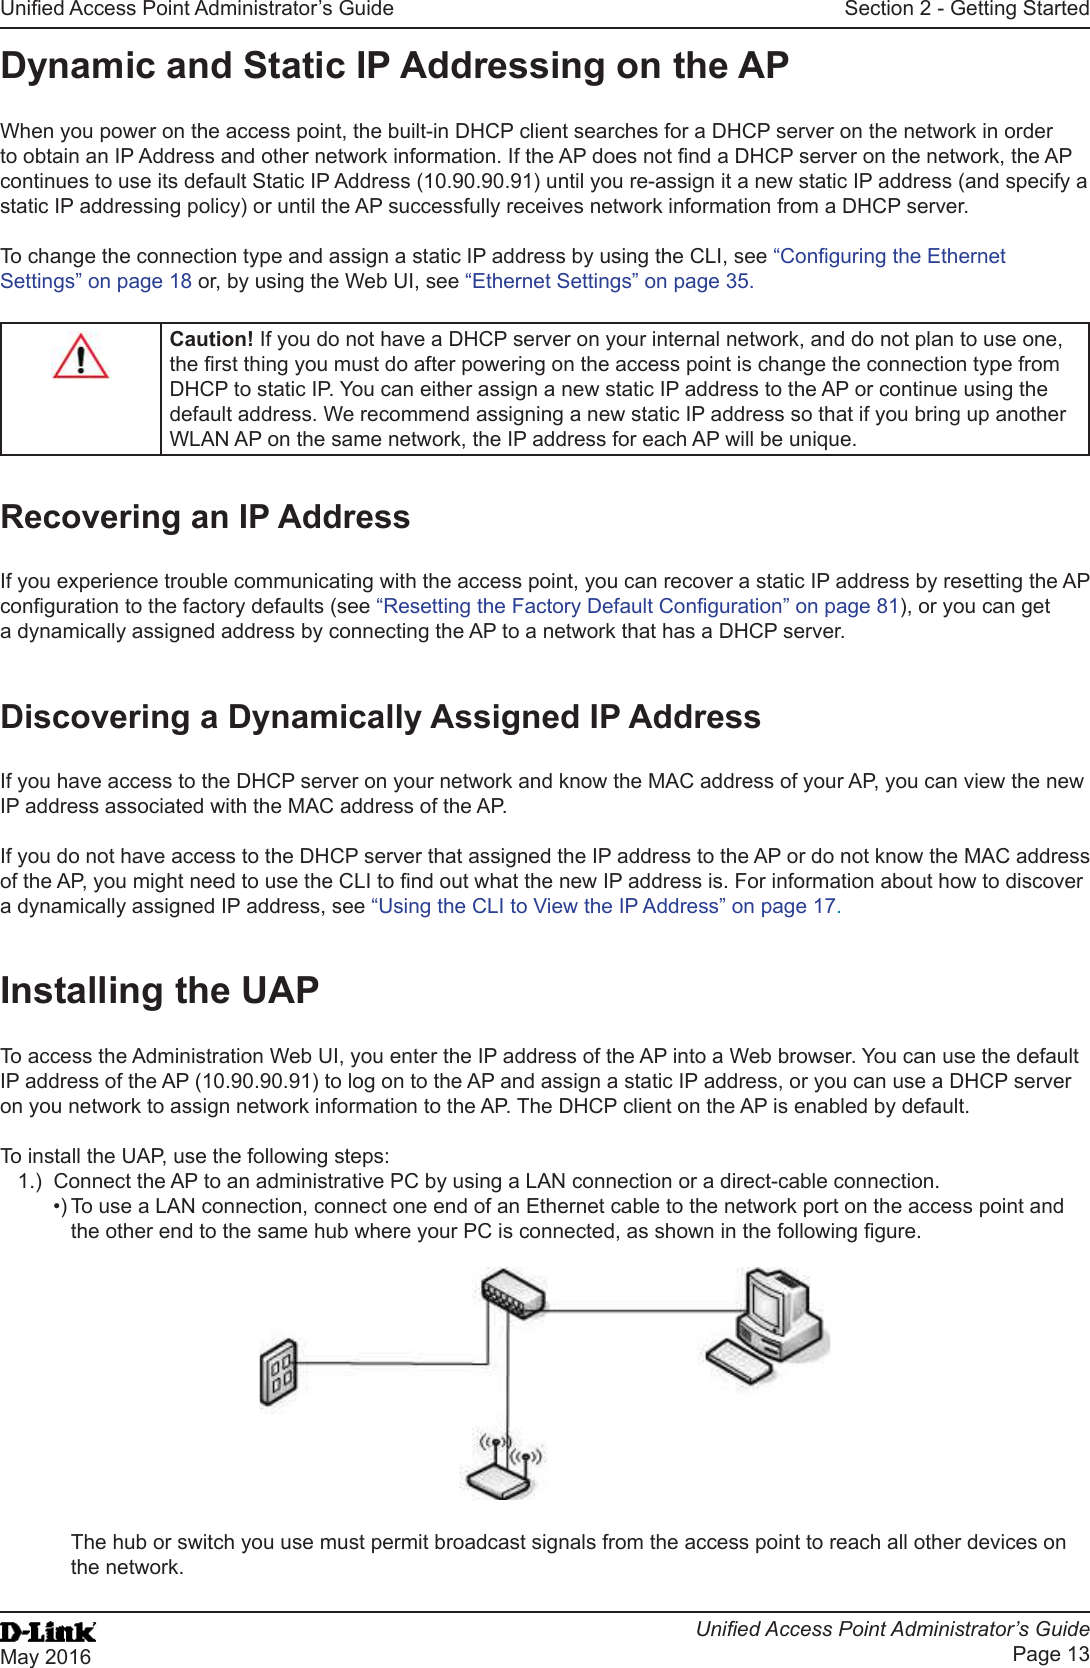 Unied Access Point Administrator’s GuideUnied Access Point Administrator’s GuidePage 13May 2016Section 2 - Getting StartedDynamic and Static IP Addressing on the APWhen you power on the access point, the built-in DHCP client searches for a DHCP server on the network in order to obtain an IP Address and other network information. If the AP does not nd a DHCP server on the network, the AP continues to use its default Static IP Address (10.90.90.91) until you re-assign it a new static IP address (and specify a static IP addressing policy) or until the AP successfully receives network information from a DHCP server.To change the connection type and assign a static IP address by using the CLI, see “Conguring the Ethernet Settings” on page 18 or, by using the Web UI, see “Ethernet Settings” on page 35.Caution! If you do not have a DHCP server on your internal network, and do not plan to use one, the rst thing you must do after powering on the access point is change the connection type from DHCP to static IP. You can either assign a new static IP address to the AP or continue using the default address. We recommend assigning a new static IP address so that if you bring up another WLAN AP on the same network, the IP address for each AP will be unique.Recovering an IP AddressIf you experience trouble communicating with the access point, you can recover a static IP address by resetting the AP conguration to the factory defaults (see “Resetting the Factory Default Conguration” on page 81), or you can get a dynamically assigned address by connecting the AP to a network that has a DHCP server.Discovering a Dynamically Assigned IP AddressIf you have access to the DHCP server on your network and know the MAC address of your AP, you can view the new IP address associated with the MAC address of the AP. If you do not have access to the DHCP server that assigned the IP address to the AP or do not know the MAC address of the AP, you might need to use the CLI to nd out what the new IP address is. For information about how to discover a dynamically assigned IP address, see “Using the CLI to View the IP Address” on page 17.Installing the UAPTo access the Administration Web UI, you enter the IP address of the AP into a Web browser. You can use the default IP address of the AP (10.90.90.91) to log on to the AP and assign a static IP address, or you can use a DHCP server on you network to assign network information to the AP. The DHCP client on the AP is enabled by default.To install the UAP, use the following steps:1.)  Connect the AP to an administrative PC by using a LAN connection or a direct-cable connection. •) To use a LAN connection, connect one end of an Ethernet cable to the network port on the access point and the other end to the same hub where your PC is connected, as shown in the following gure.The hub or switch you use must permit broadcast signals from the access point to reach all other devices on the network.